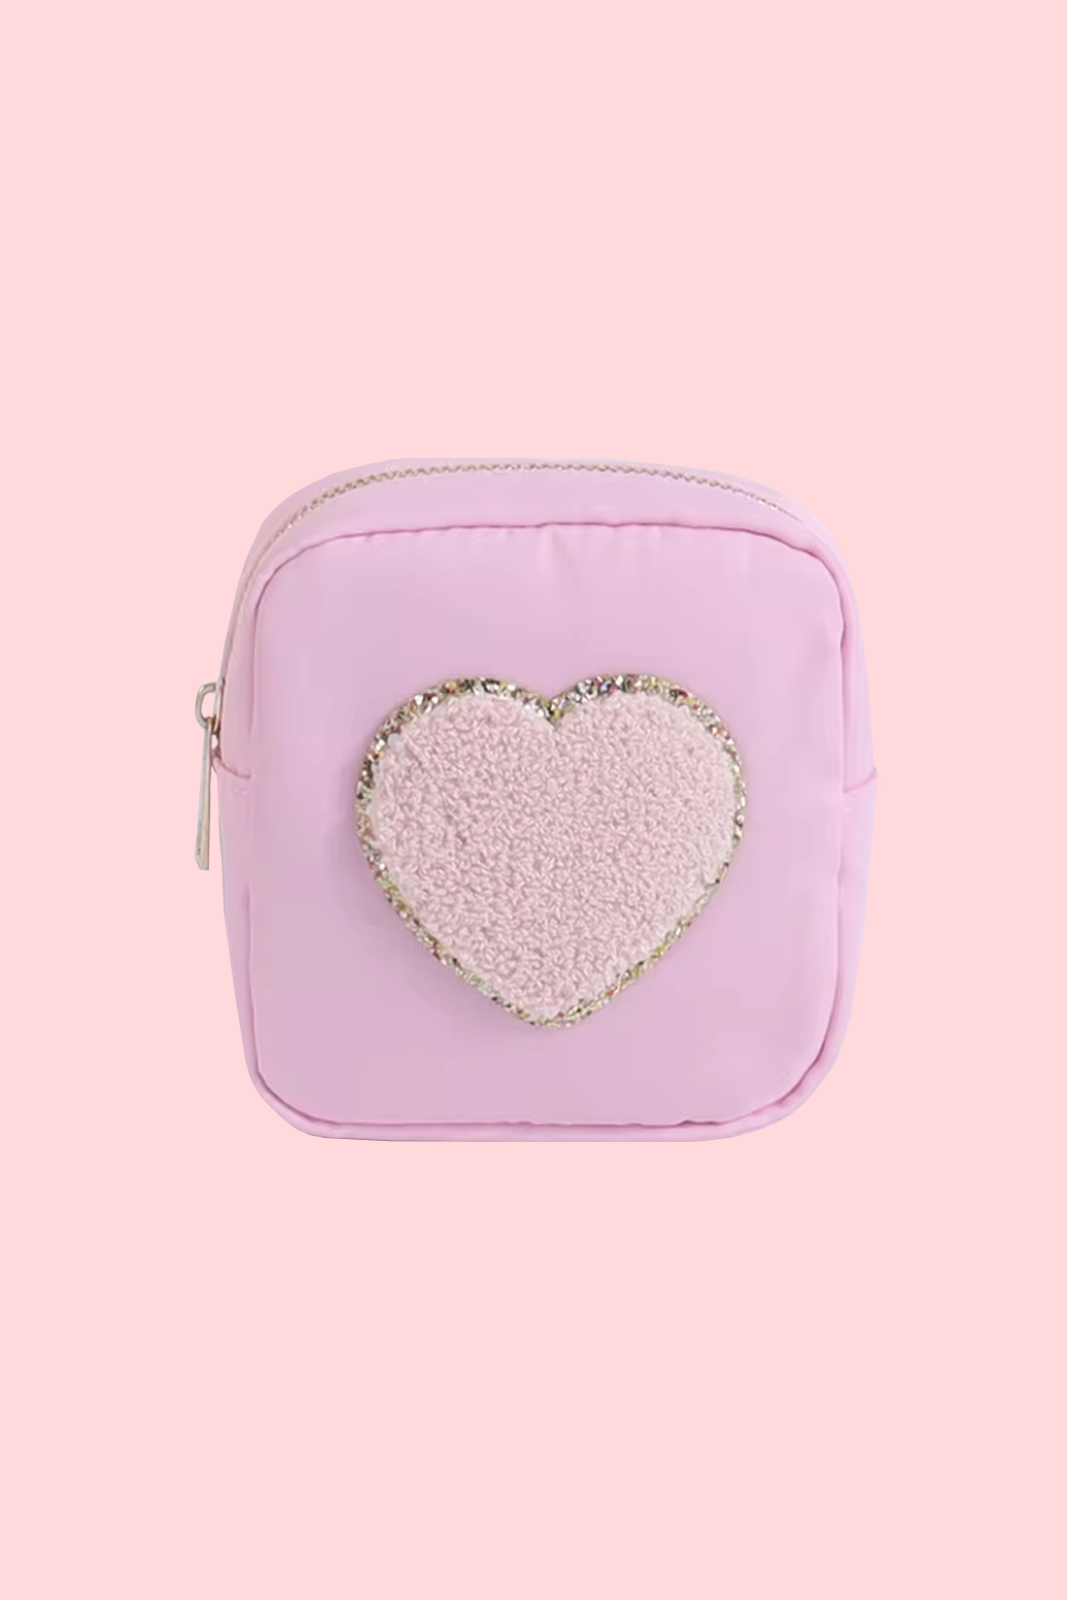 Travel Pouch Mini - Pink Heart